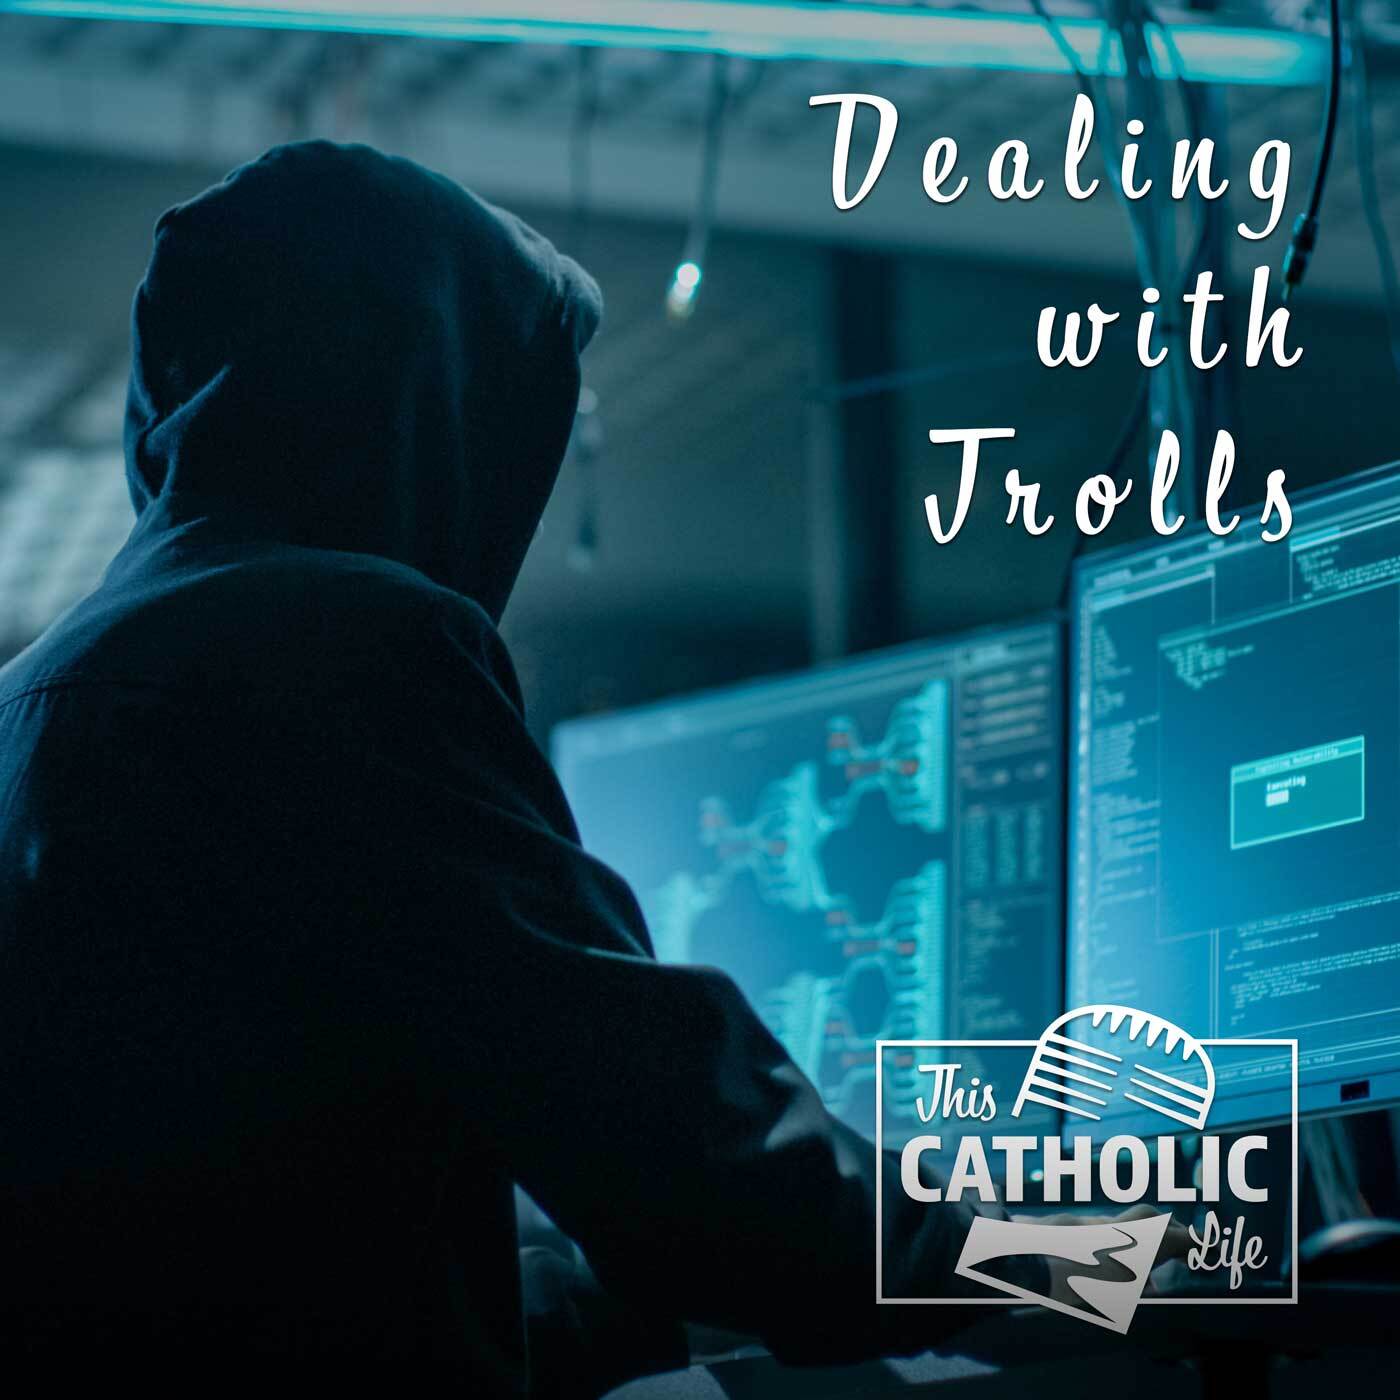 This-Catholic-Life-Podcast_EP61_Dealing-with-Trolls_1400x1400.jpg